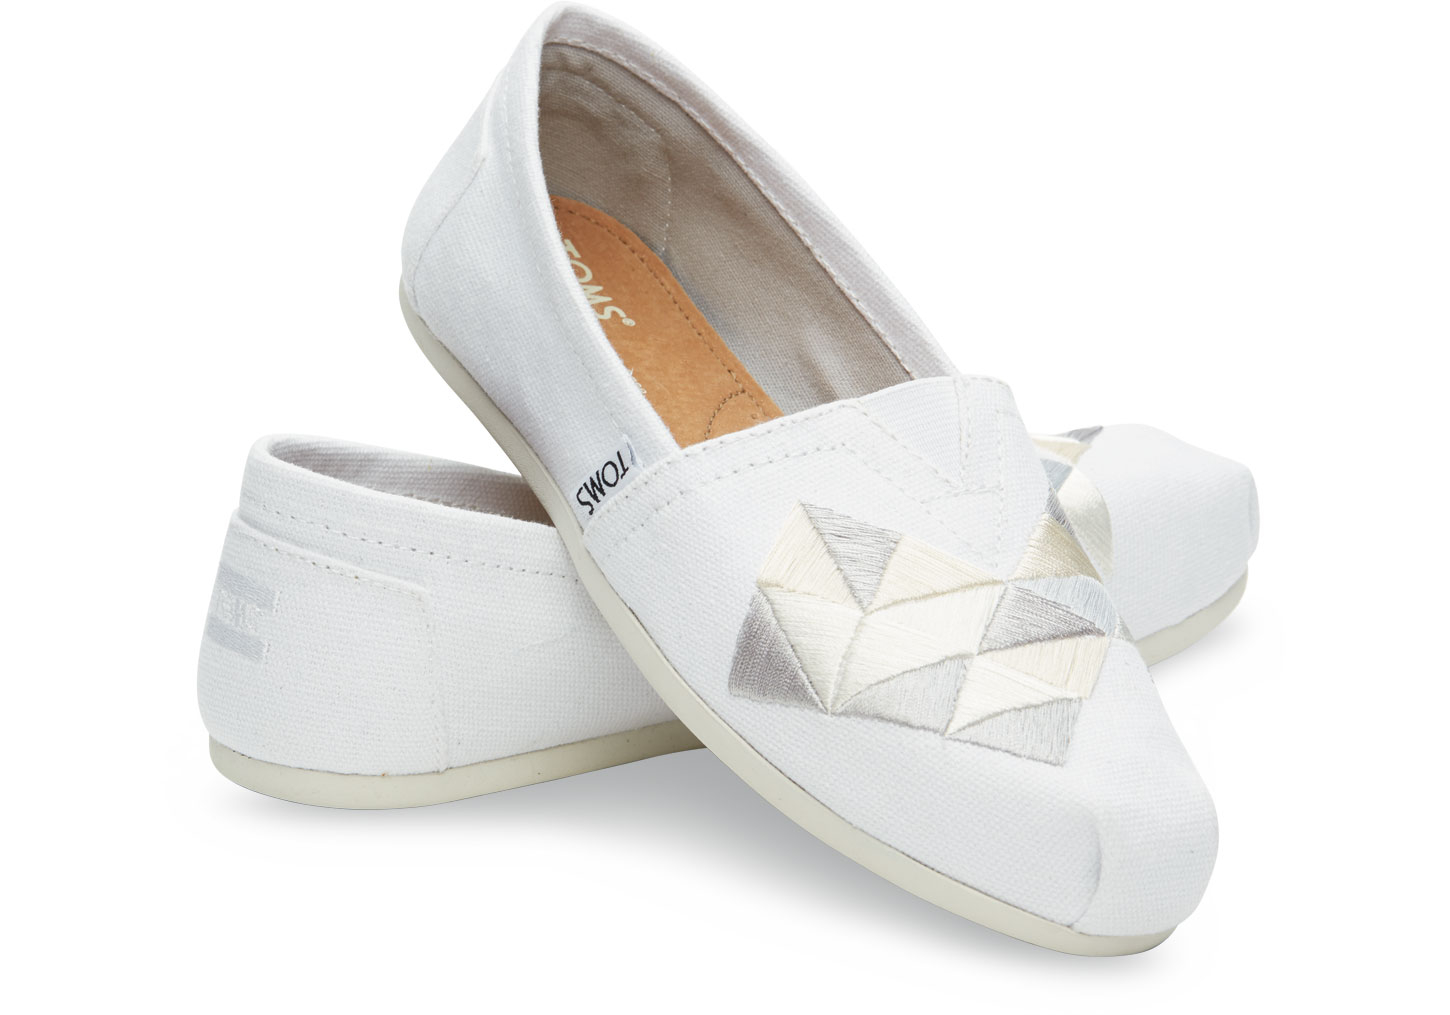 Toms White Canvas Embroidery Women's Classics in White | Lyst